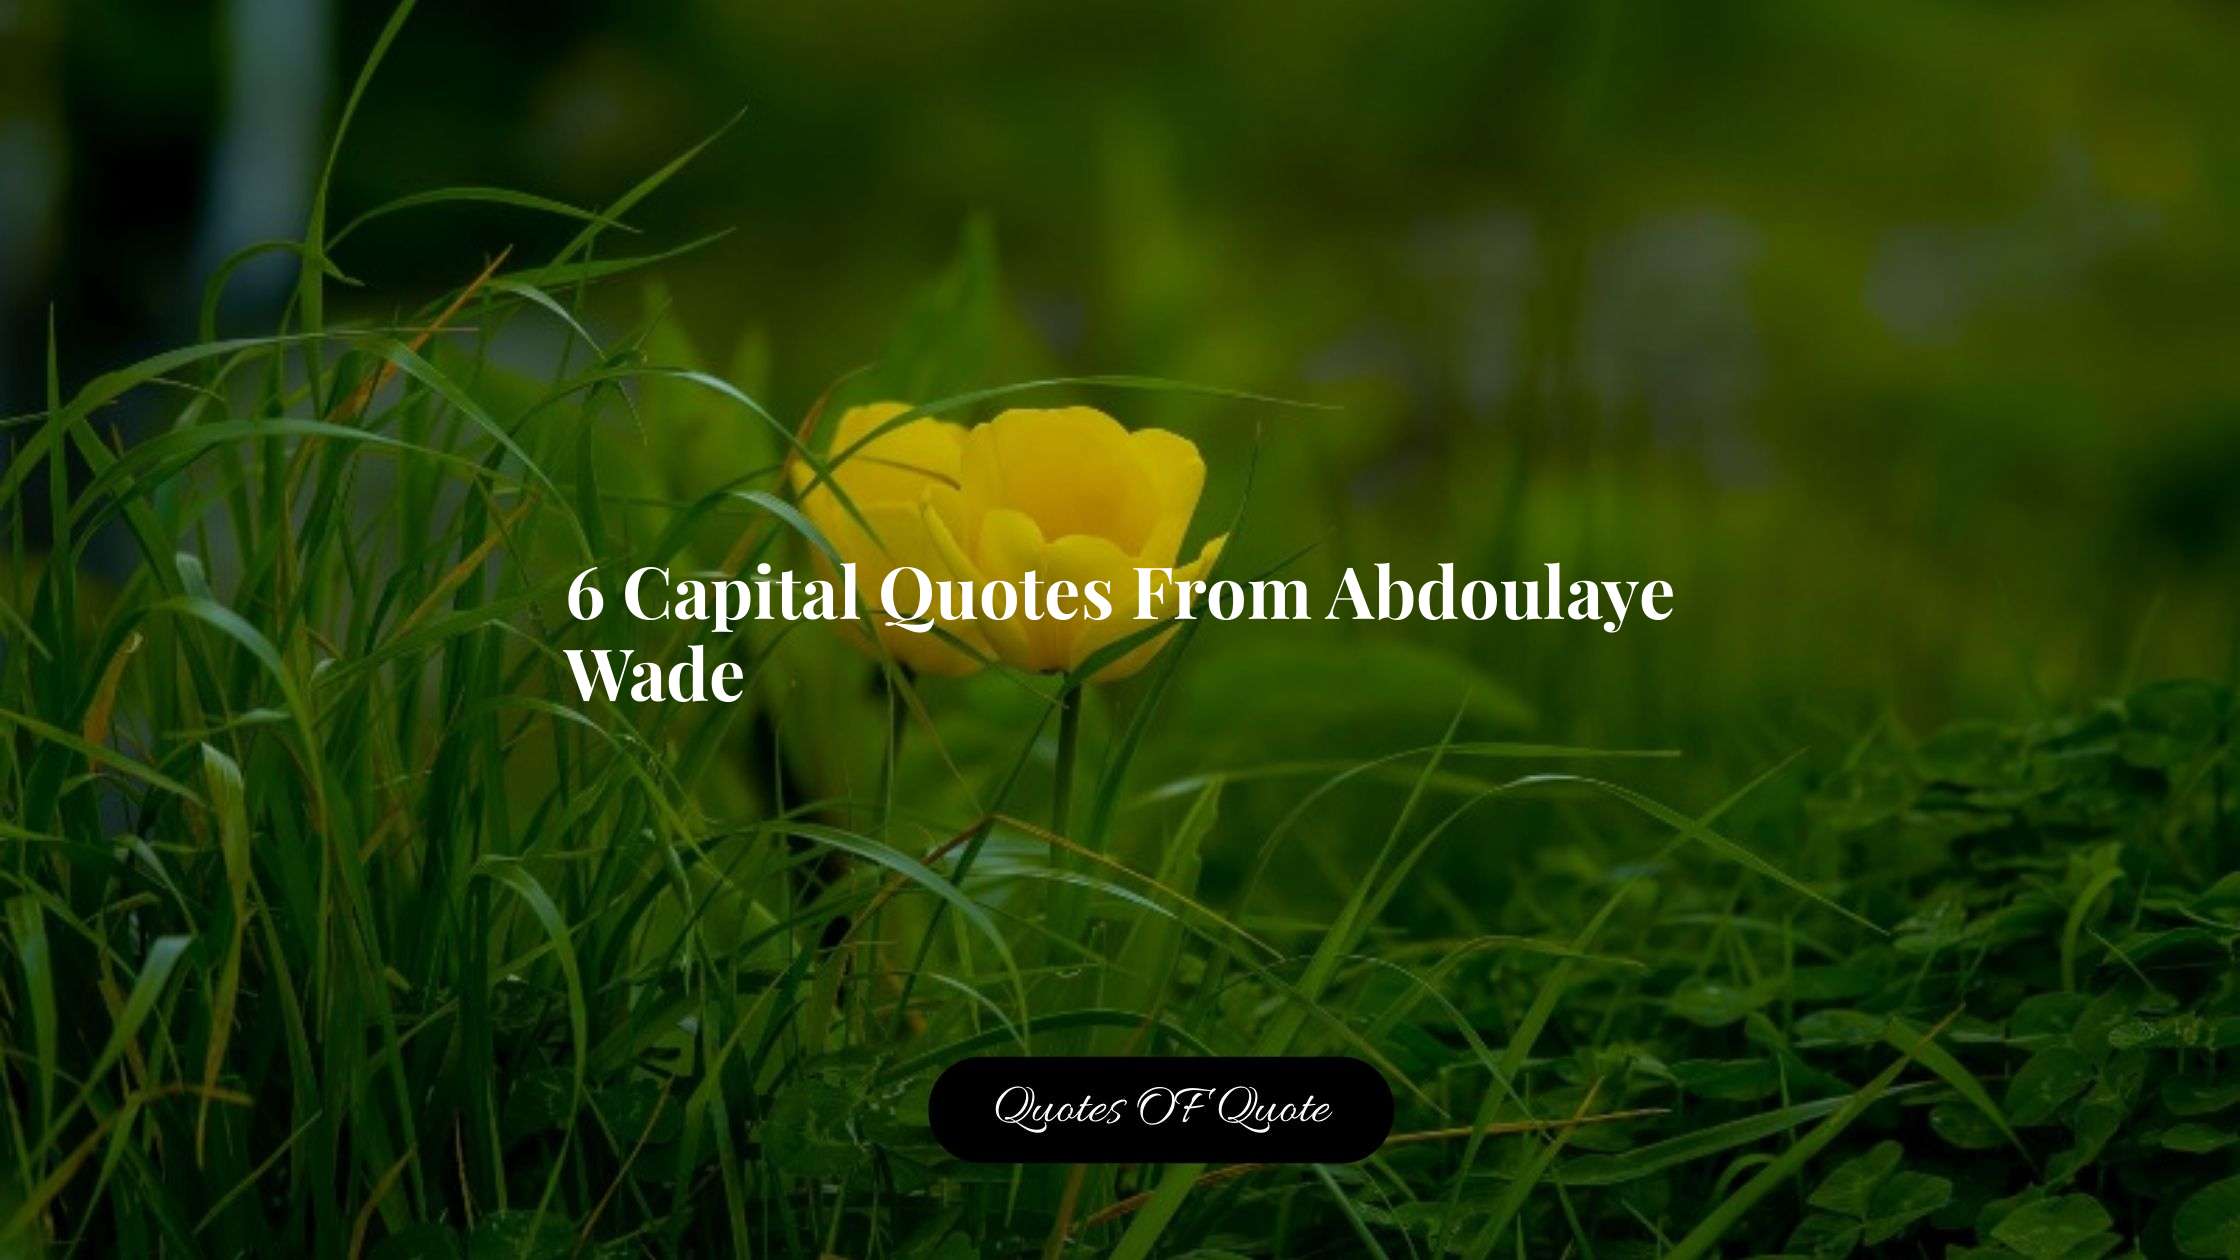 6 Capital Quotes From Abdoulaye Wade